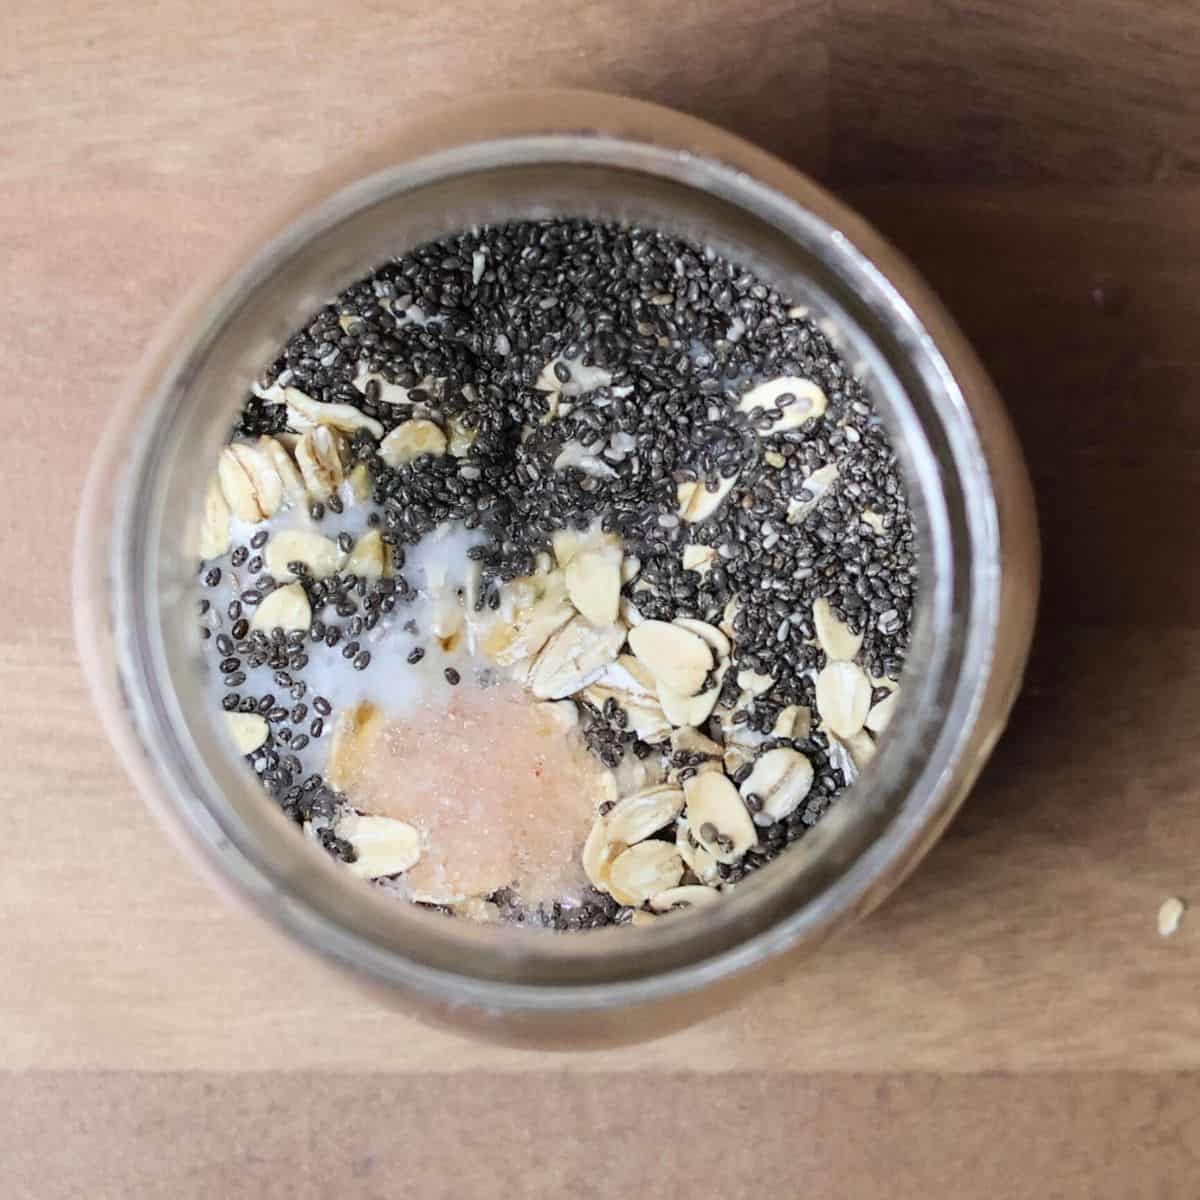 A top-down image of a mason jar showing the initial layer of ingredients for overnight oats before mixing: rolled oats, chia seeds, and a pinch of sea salt, ready to be combined with coconut milk.